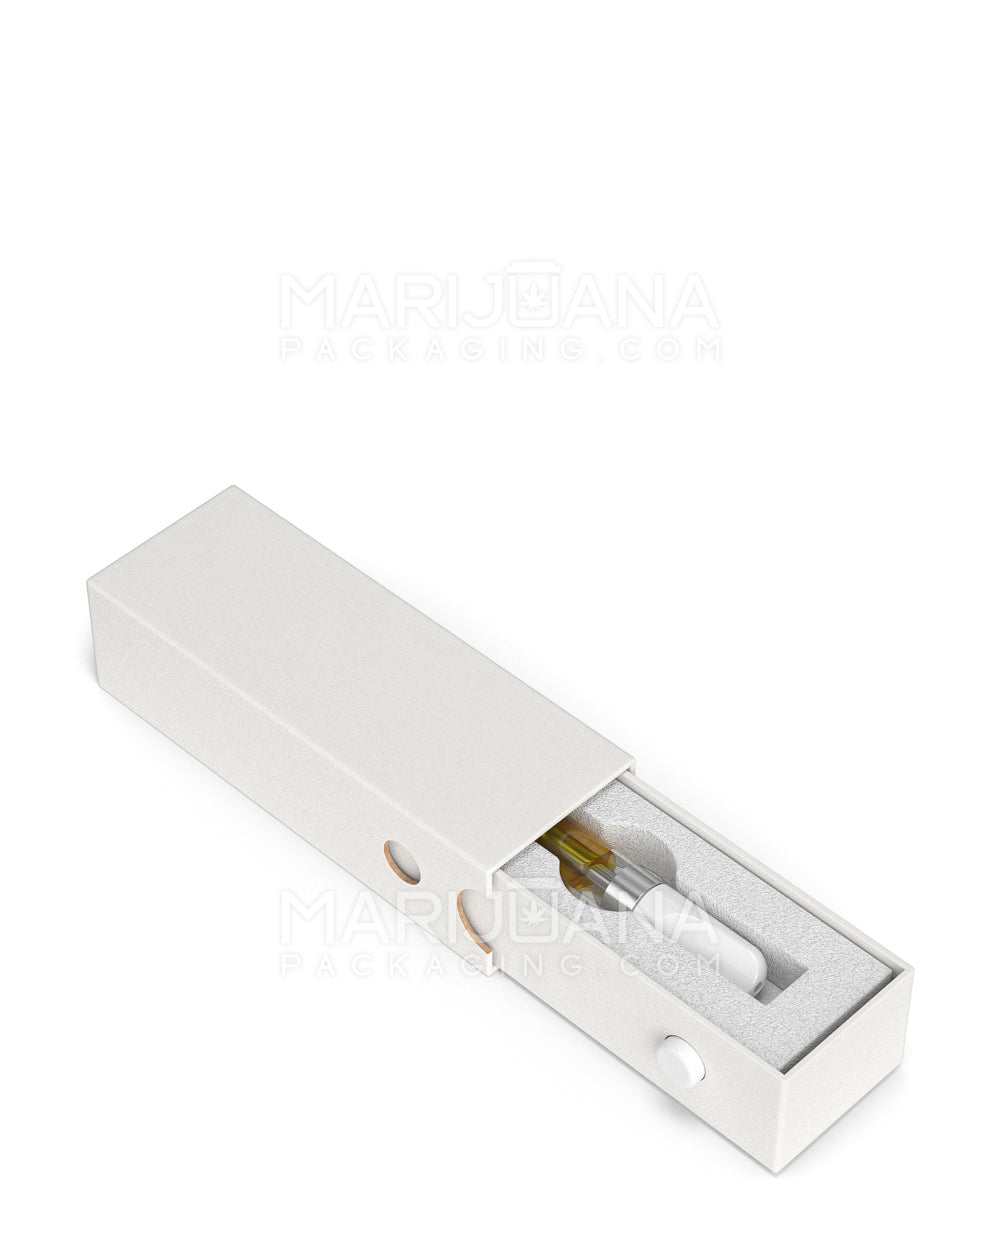 Child Resistant & Sustainable Recyclable Cardboard Vape Cartridge Box w/ Button & Foam Insert | 100mm - White | Sample - 2